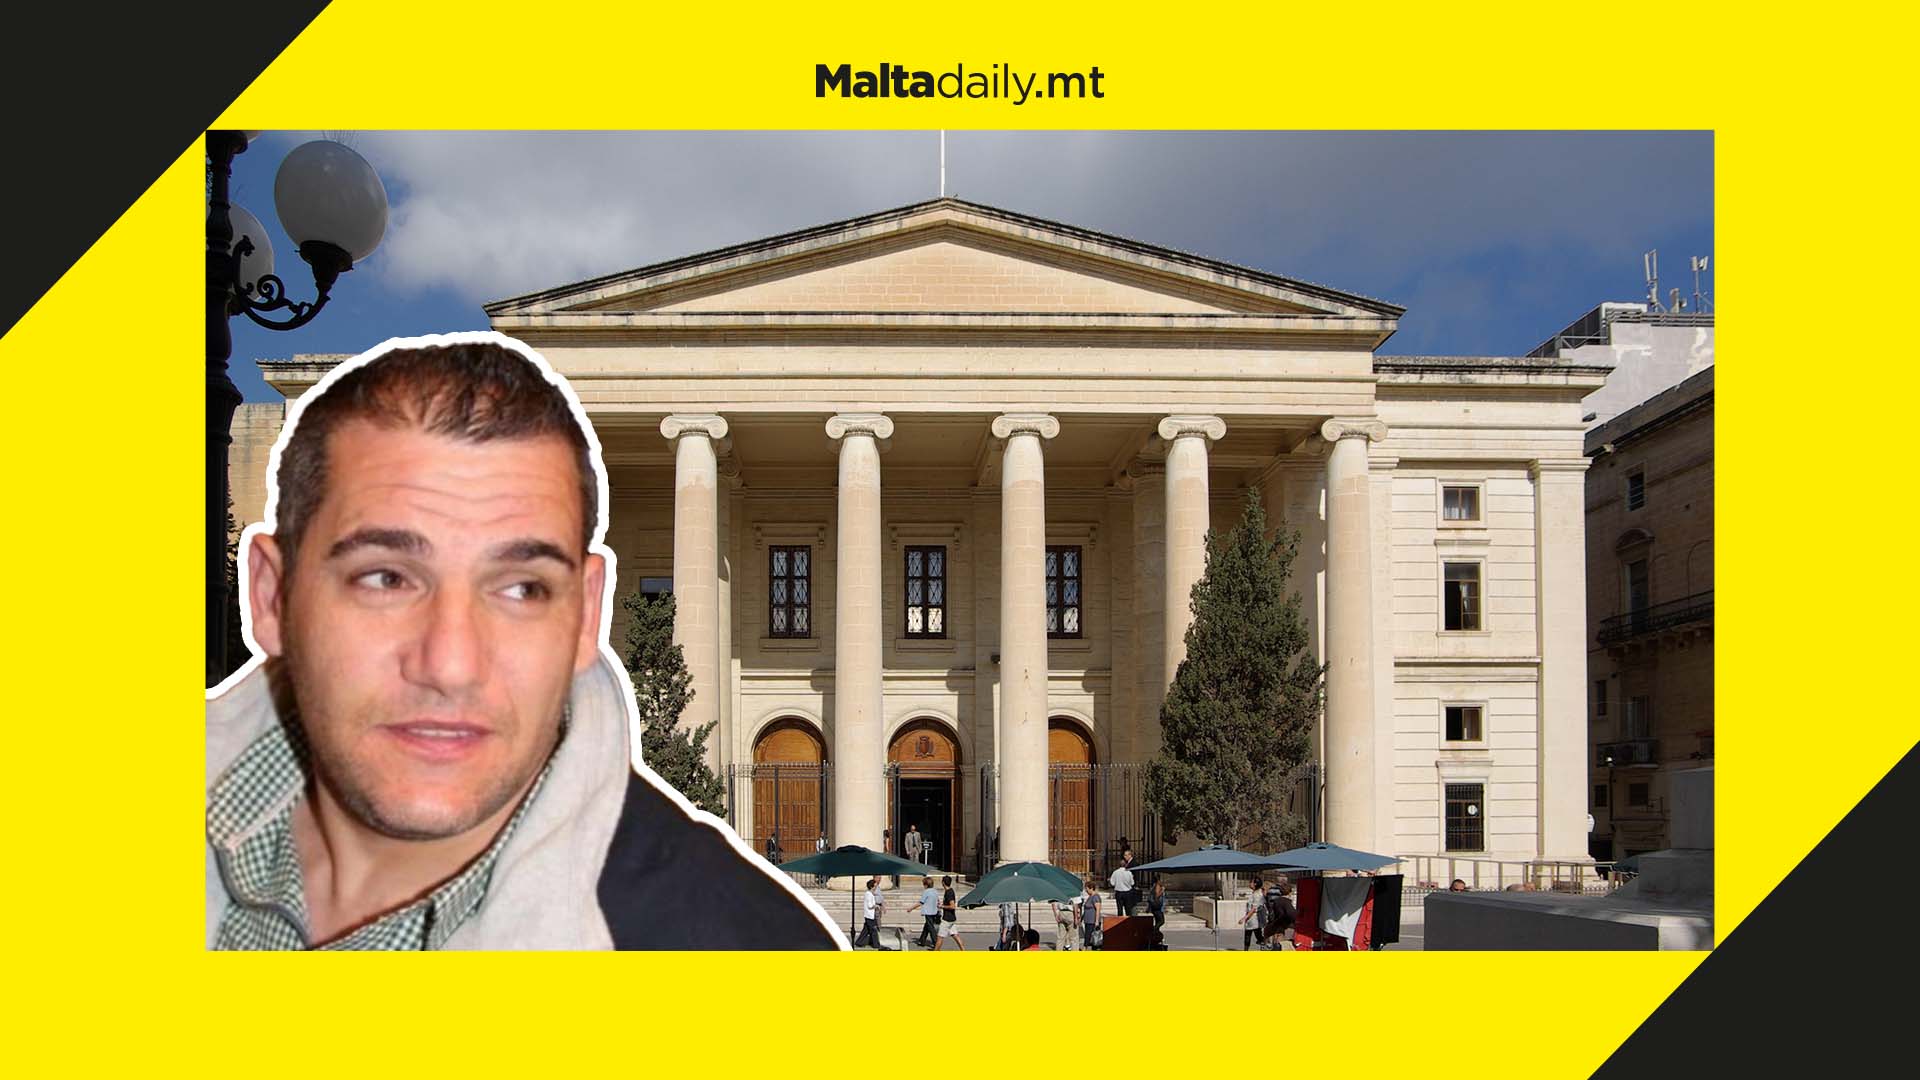 Paola shooter Roderick Cassar to become first person ever charged with femicide in Malta